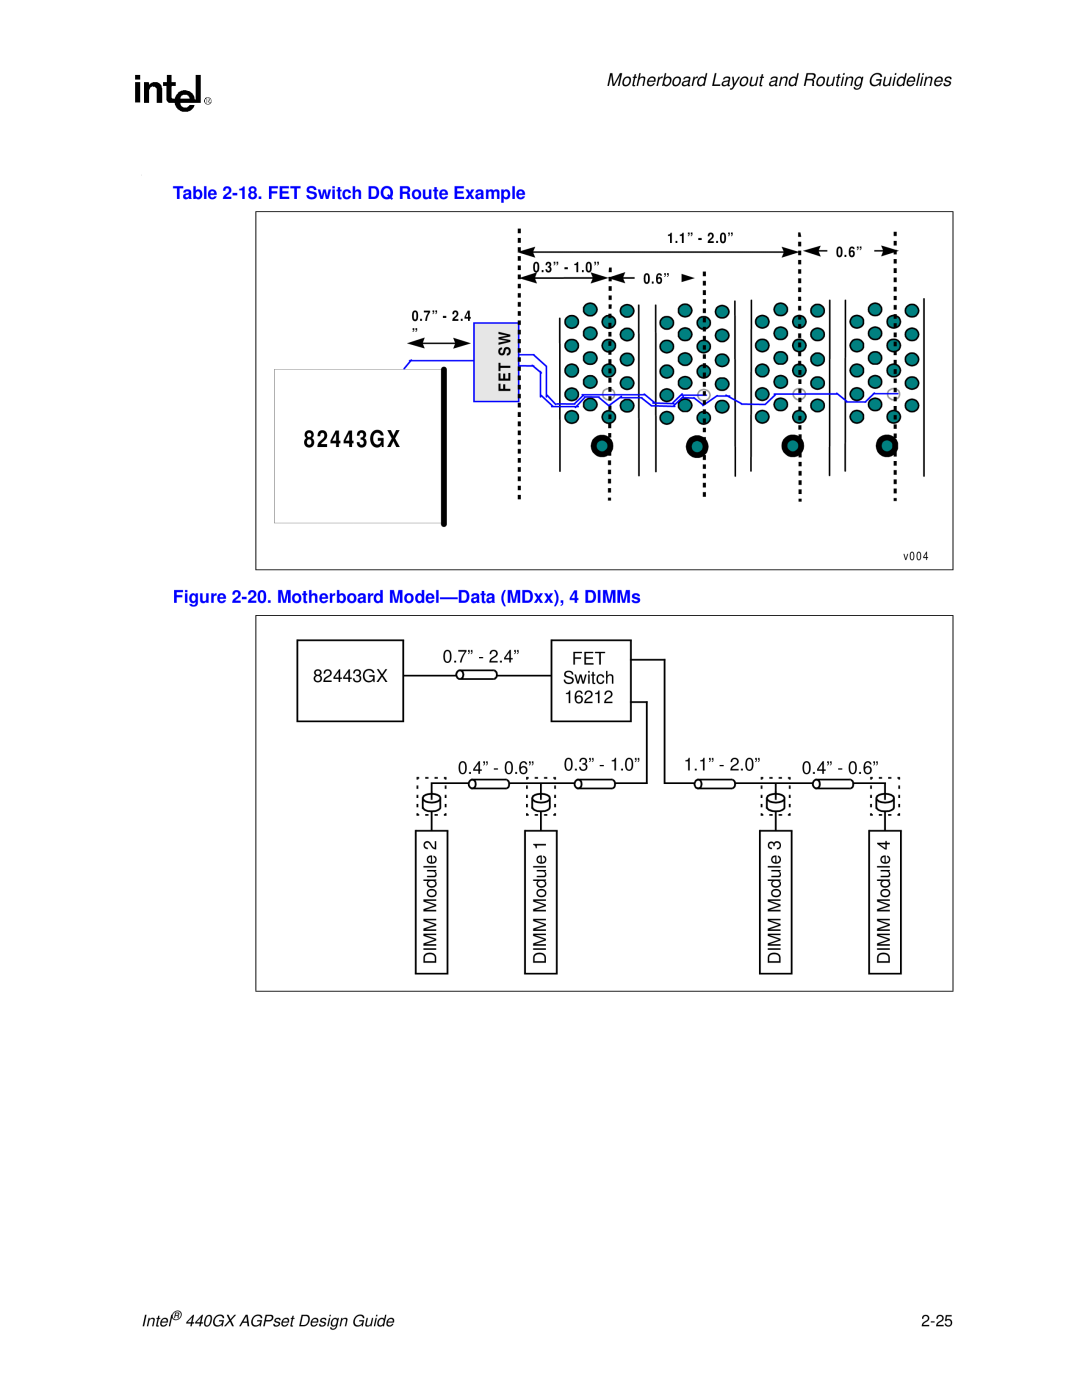 Intel 440GX manual 18. FET Switch DQ Route Example, 20. Motherboard Model-Data MDxx, 4 DIMMs, 82443GX 